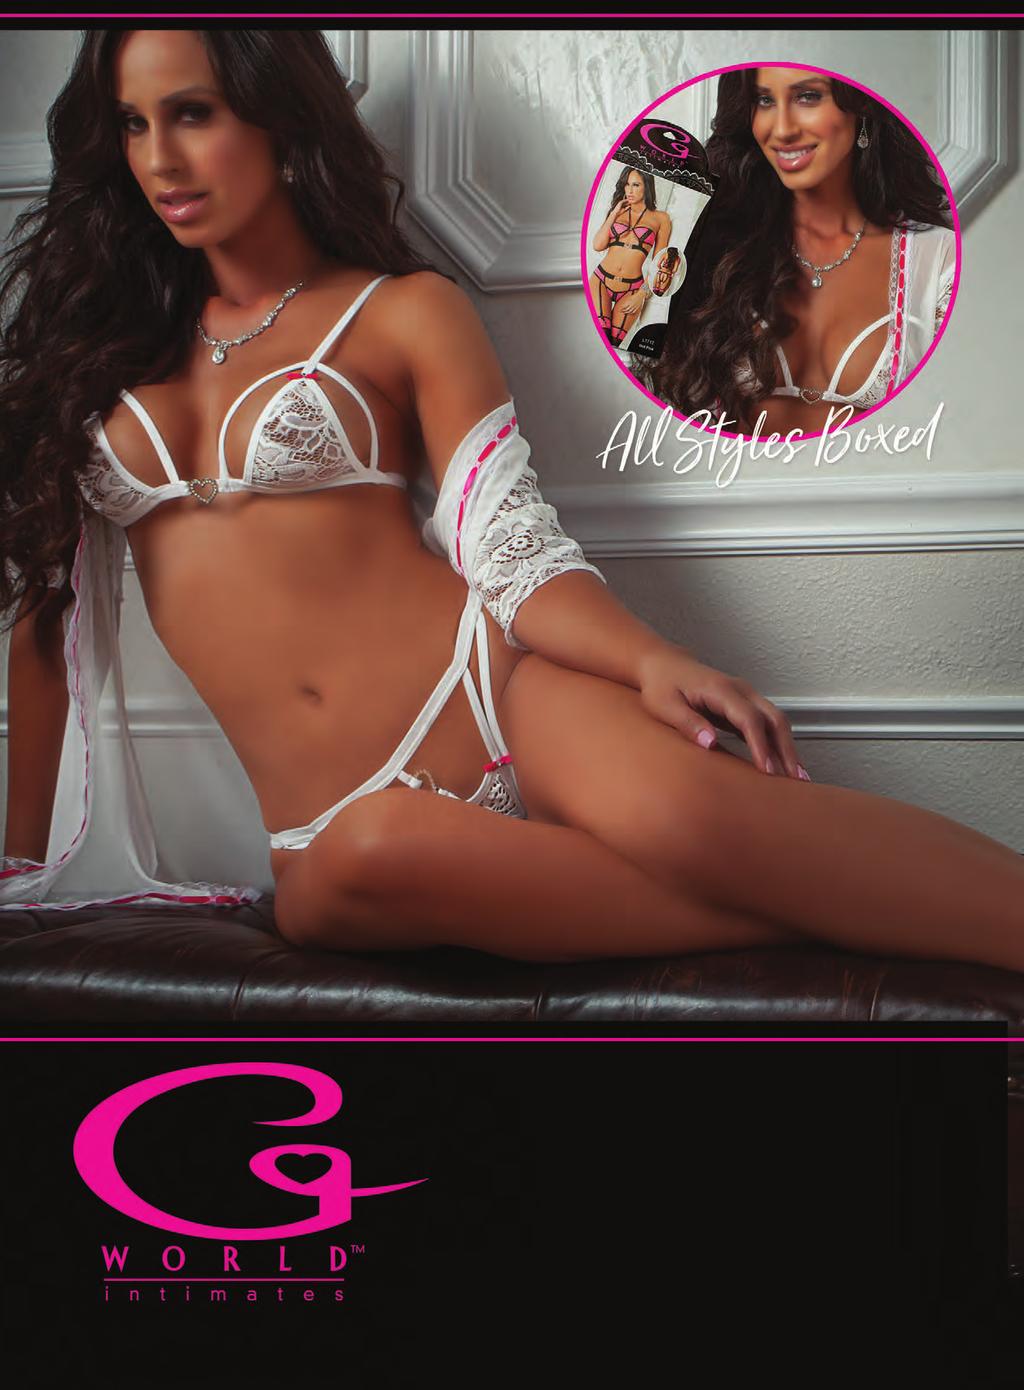 G World Intimates a Division of East Coast Intimates, LLC Corporate Office: